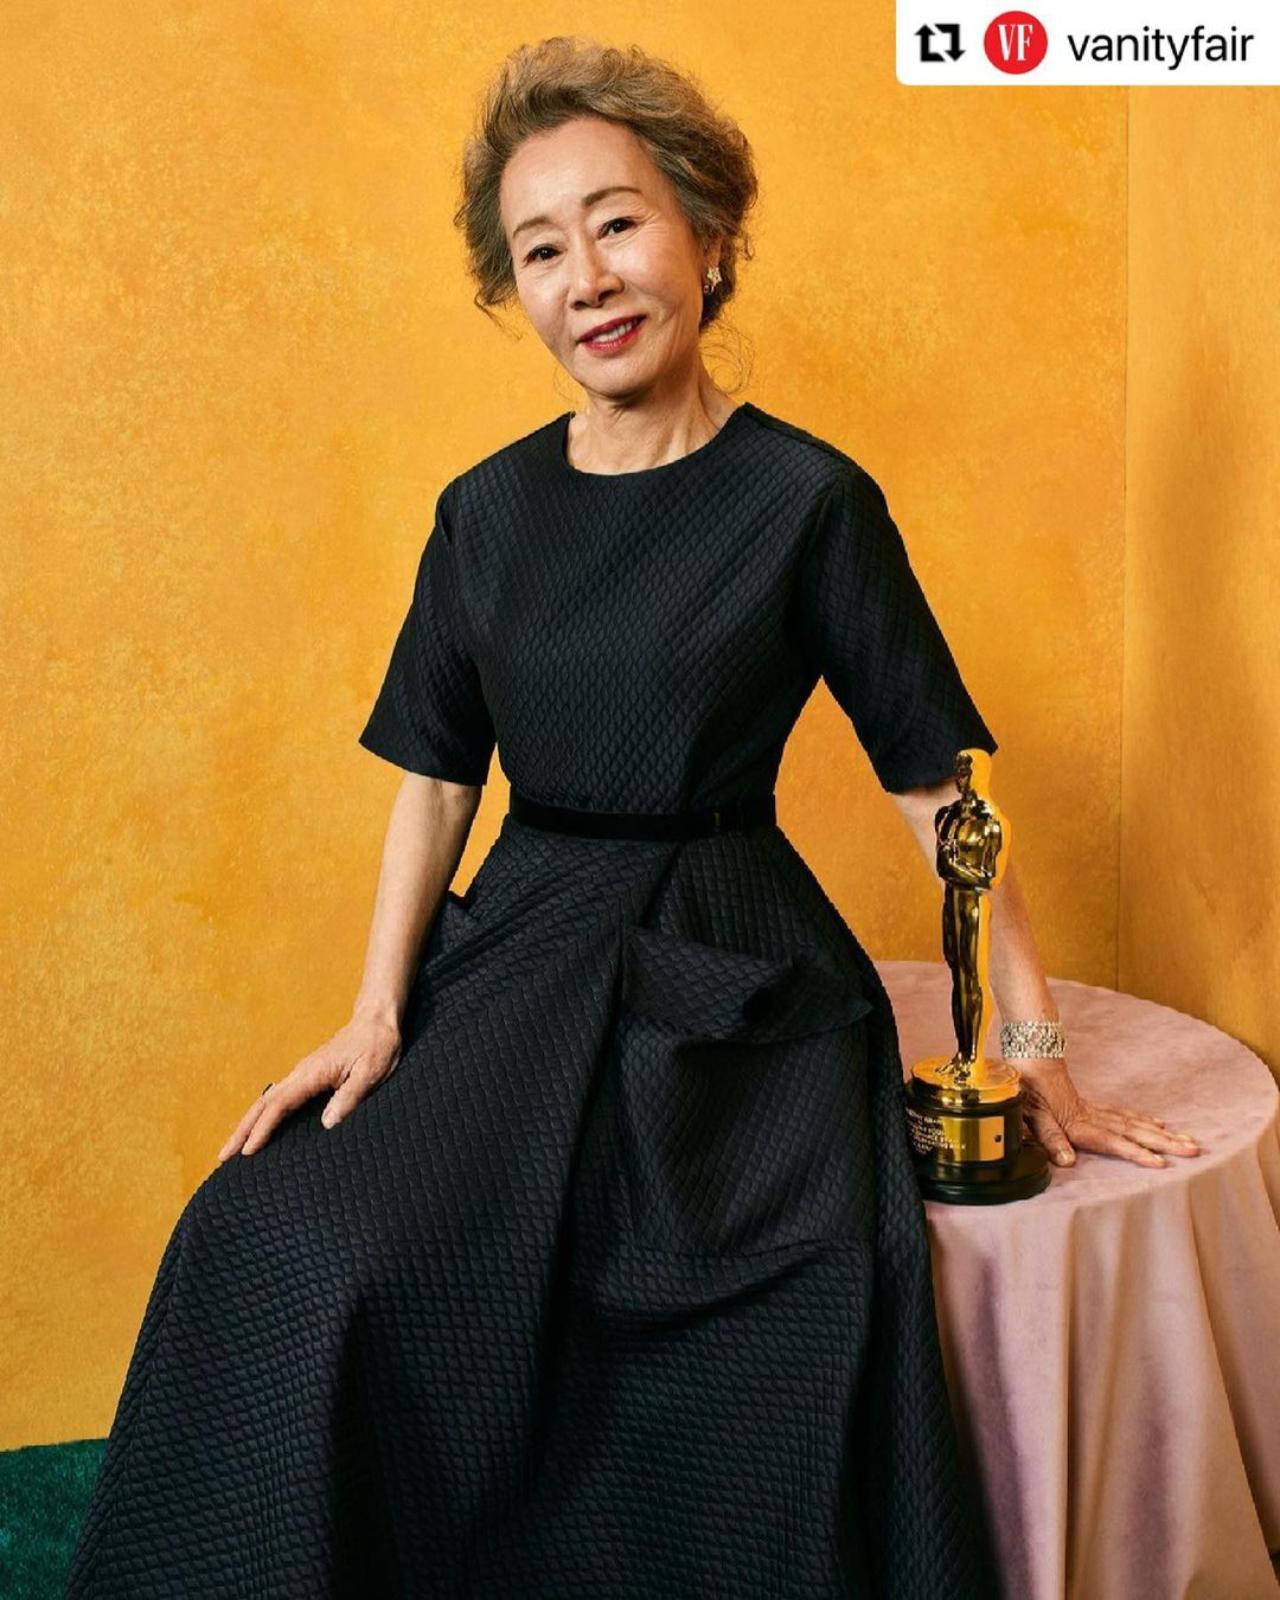 Youn Yuh-jung
Renowned South Korean actress Youn Yuh-jung, with a career spanning over fifty years, holds a distinguished place in the industry. She made history by becoming the first South Korean star to win the Best Supporting Actress Oscar for her role in 'Minari'